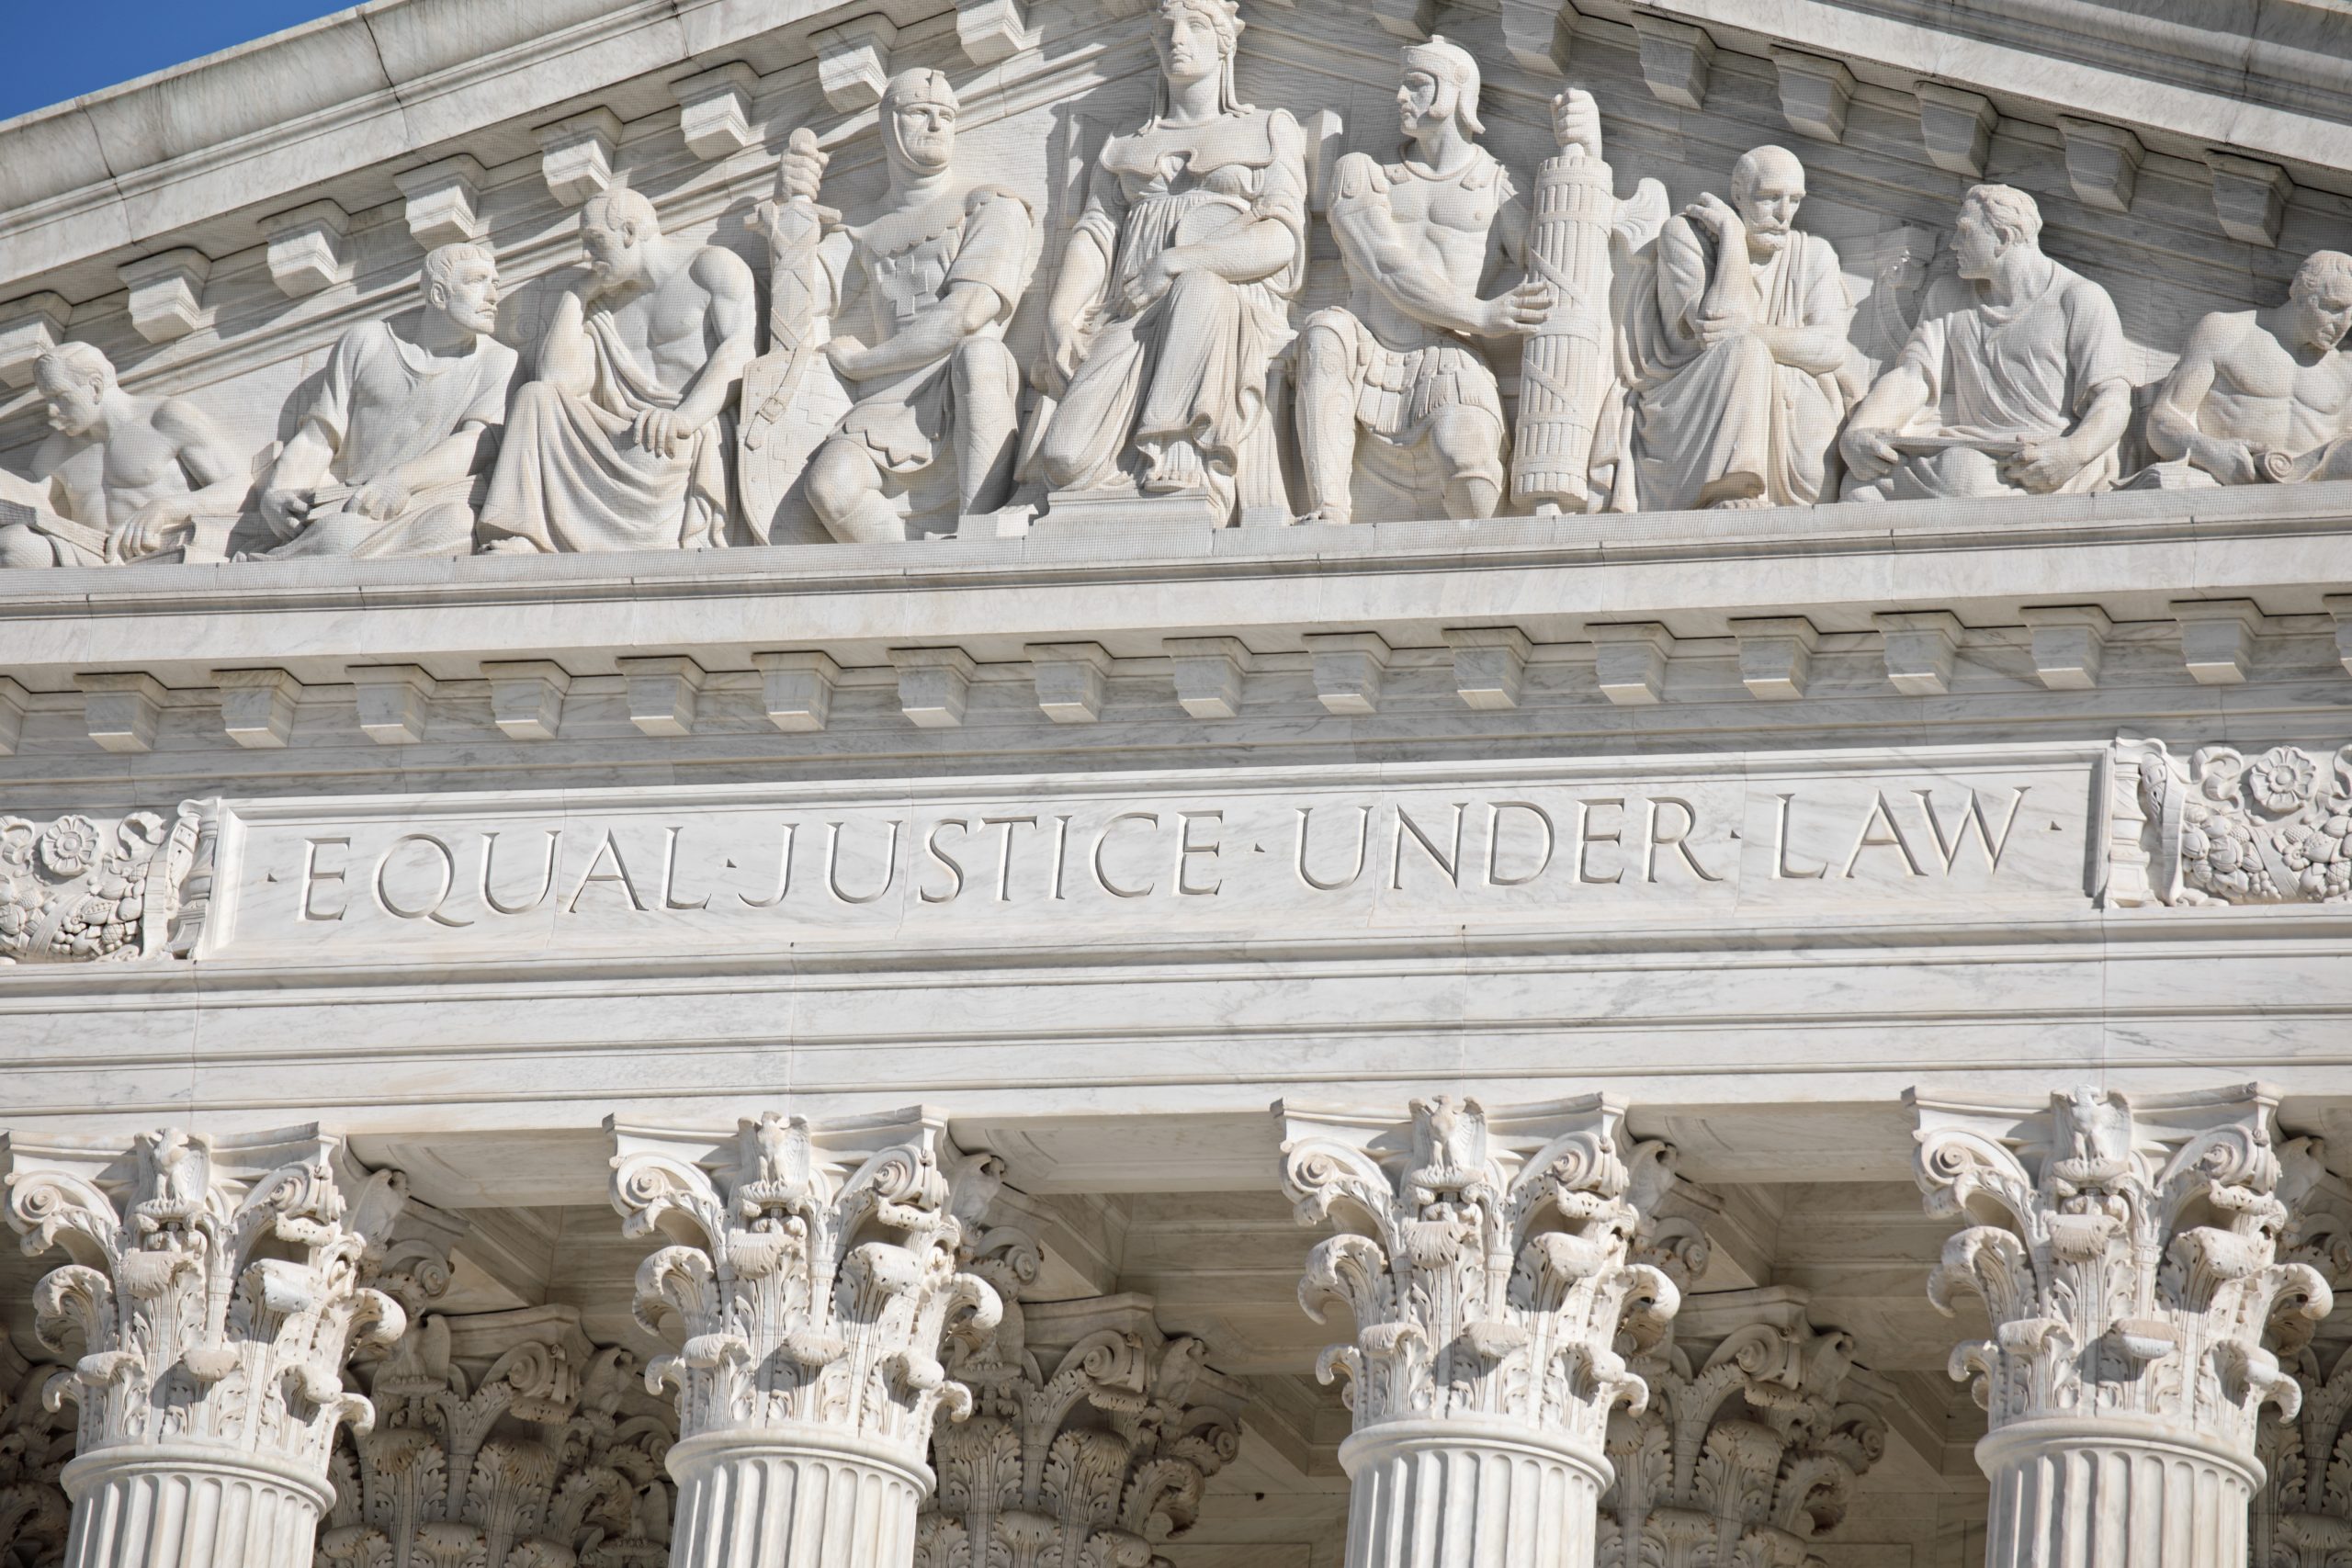 U.S. Supreme Court to Hear Case Challenging Administrative Law Judges Later This Month